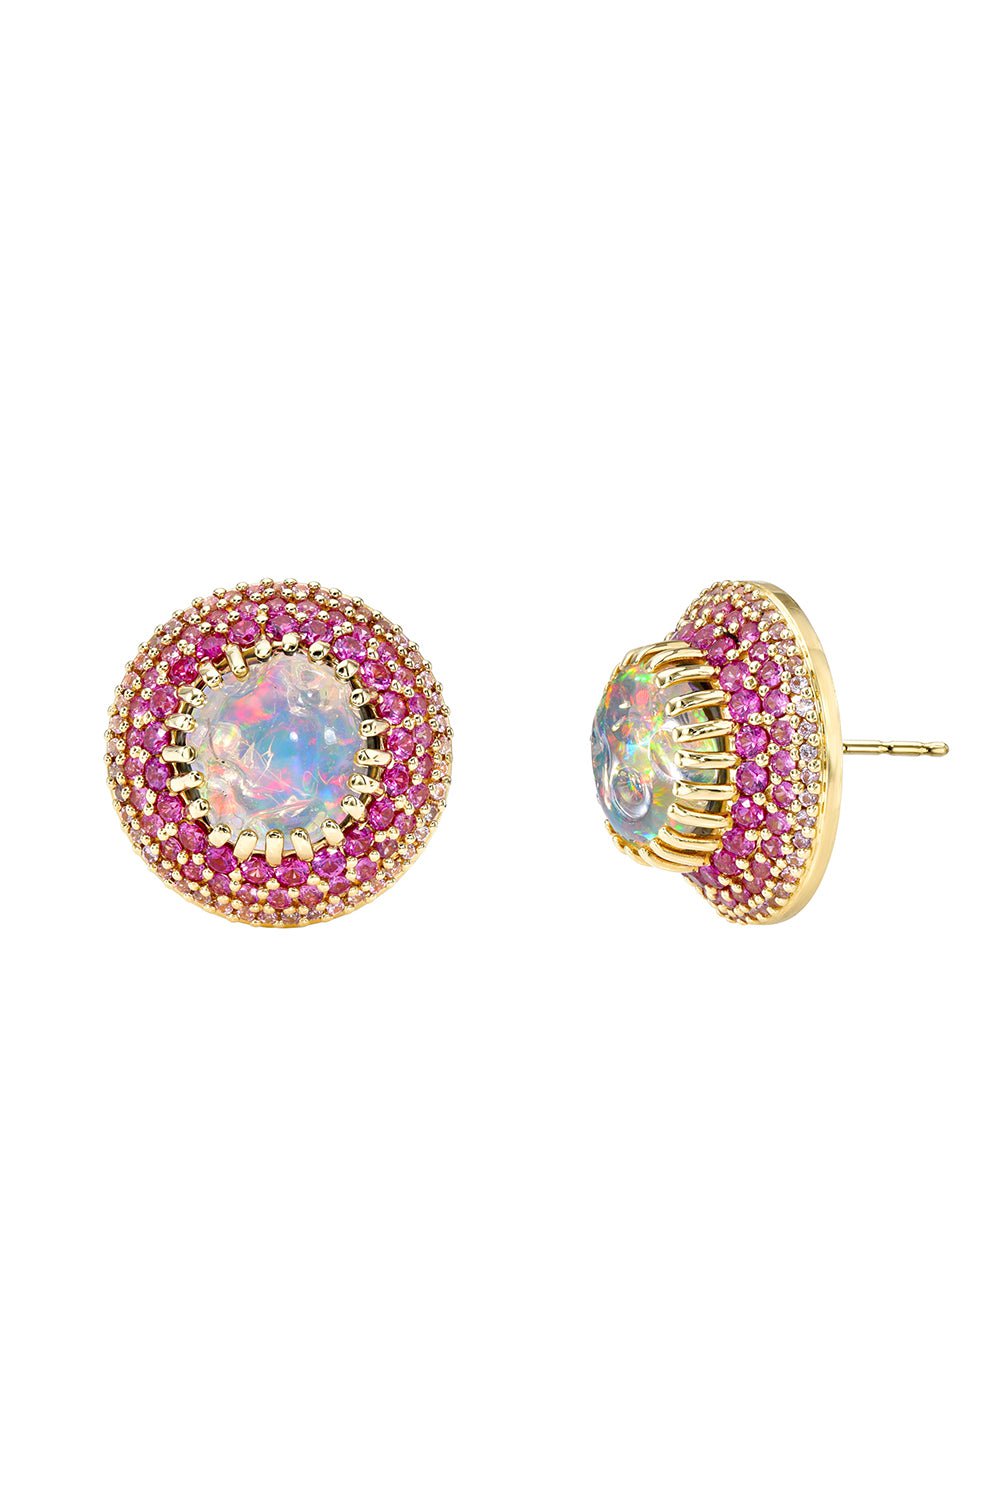 MEREDITH YOUNG-Blooming Fire Opal Earrings-YELLOW GOLD